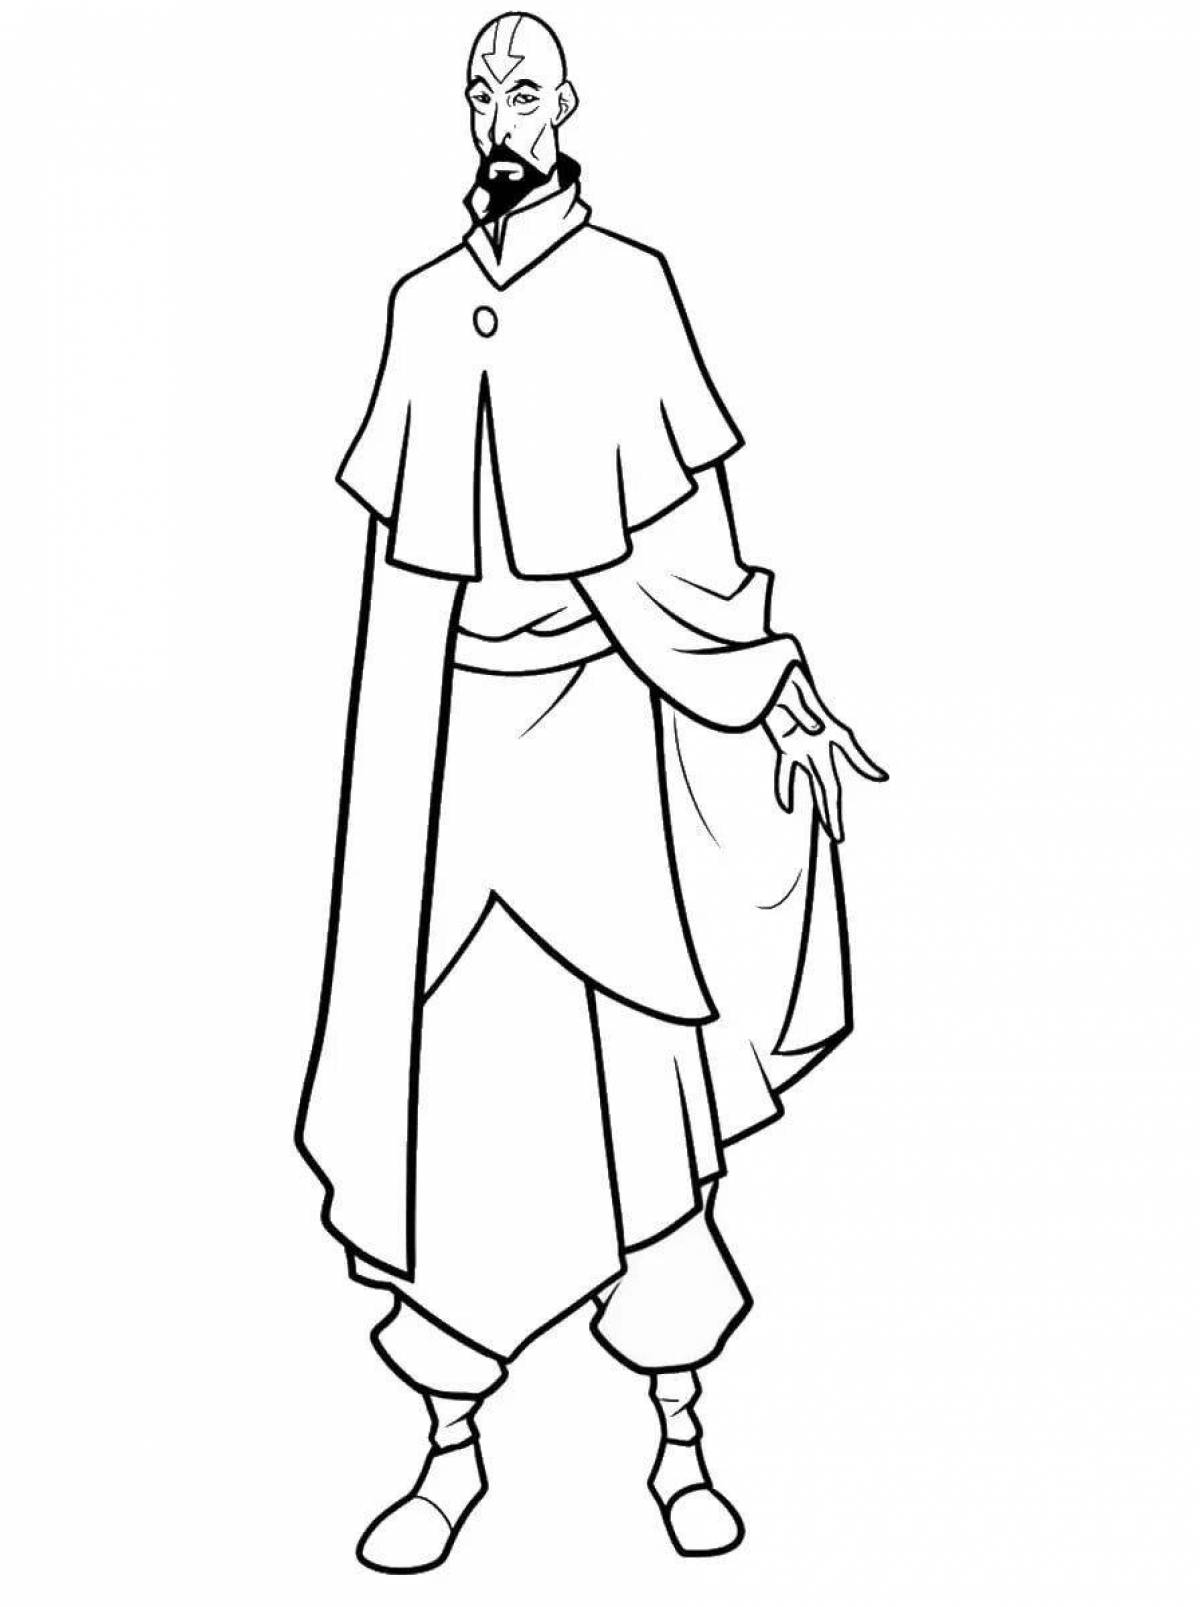 Awesome korra avatar coloring page